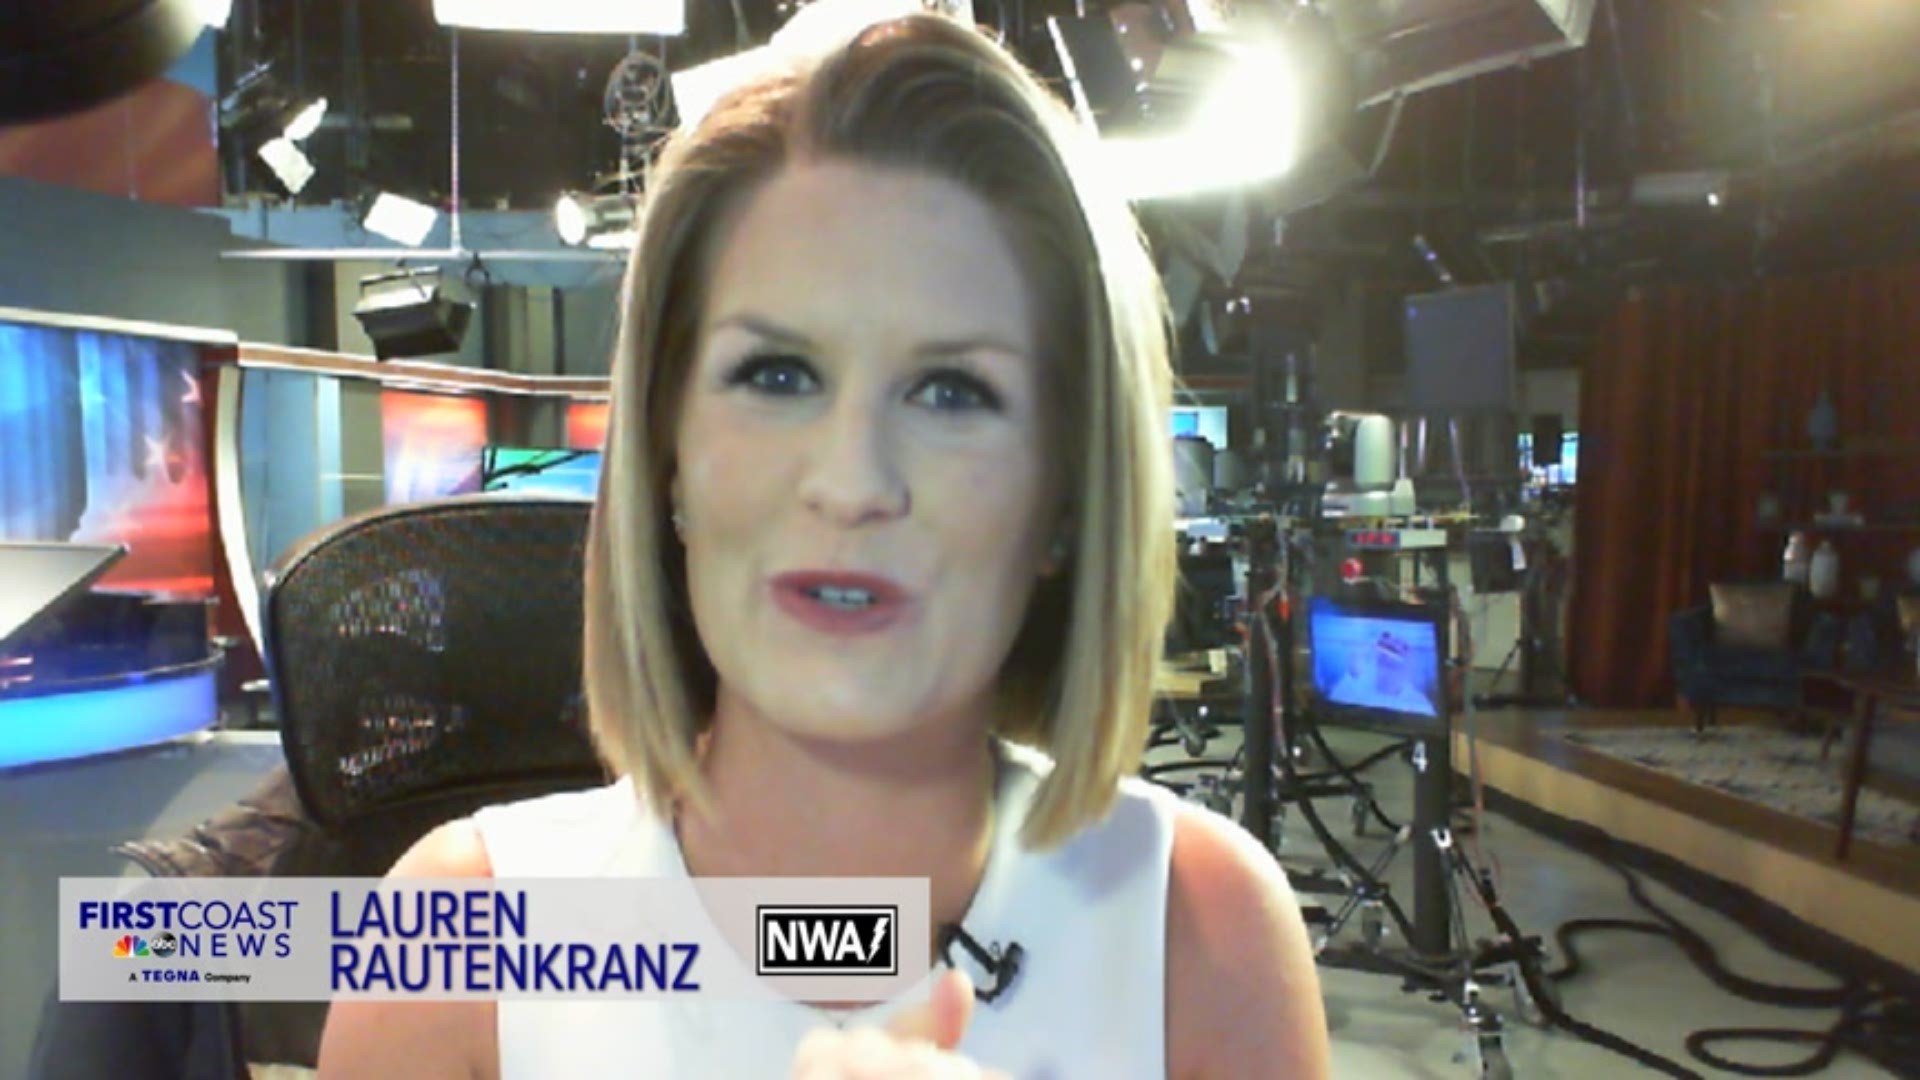 Meteorologist Lauren Rautenkranz says the heat wave is only beginning! Stay cool this Memorial Day holiday.